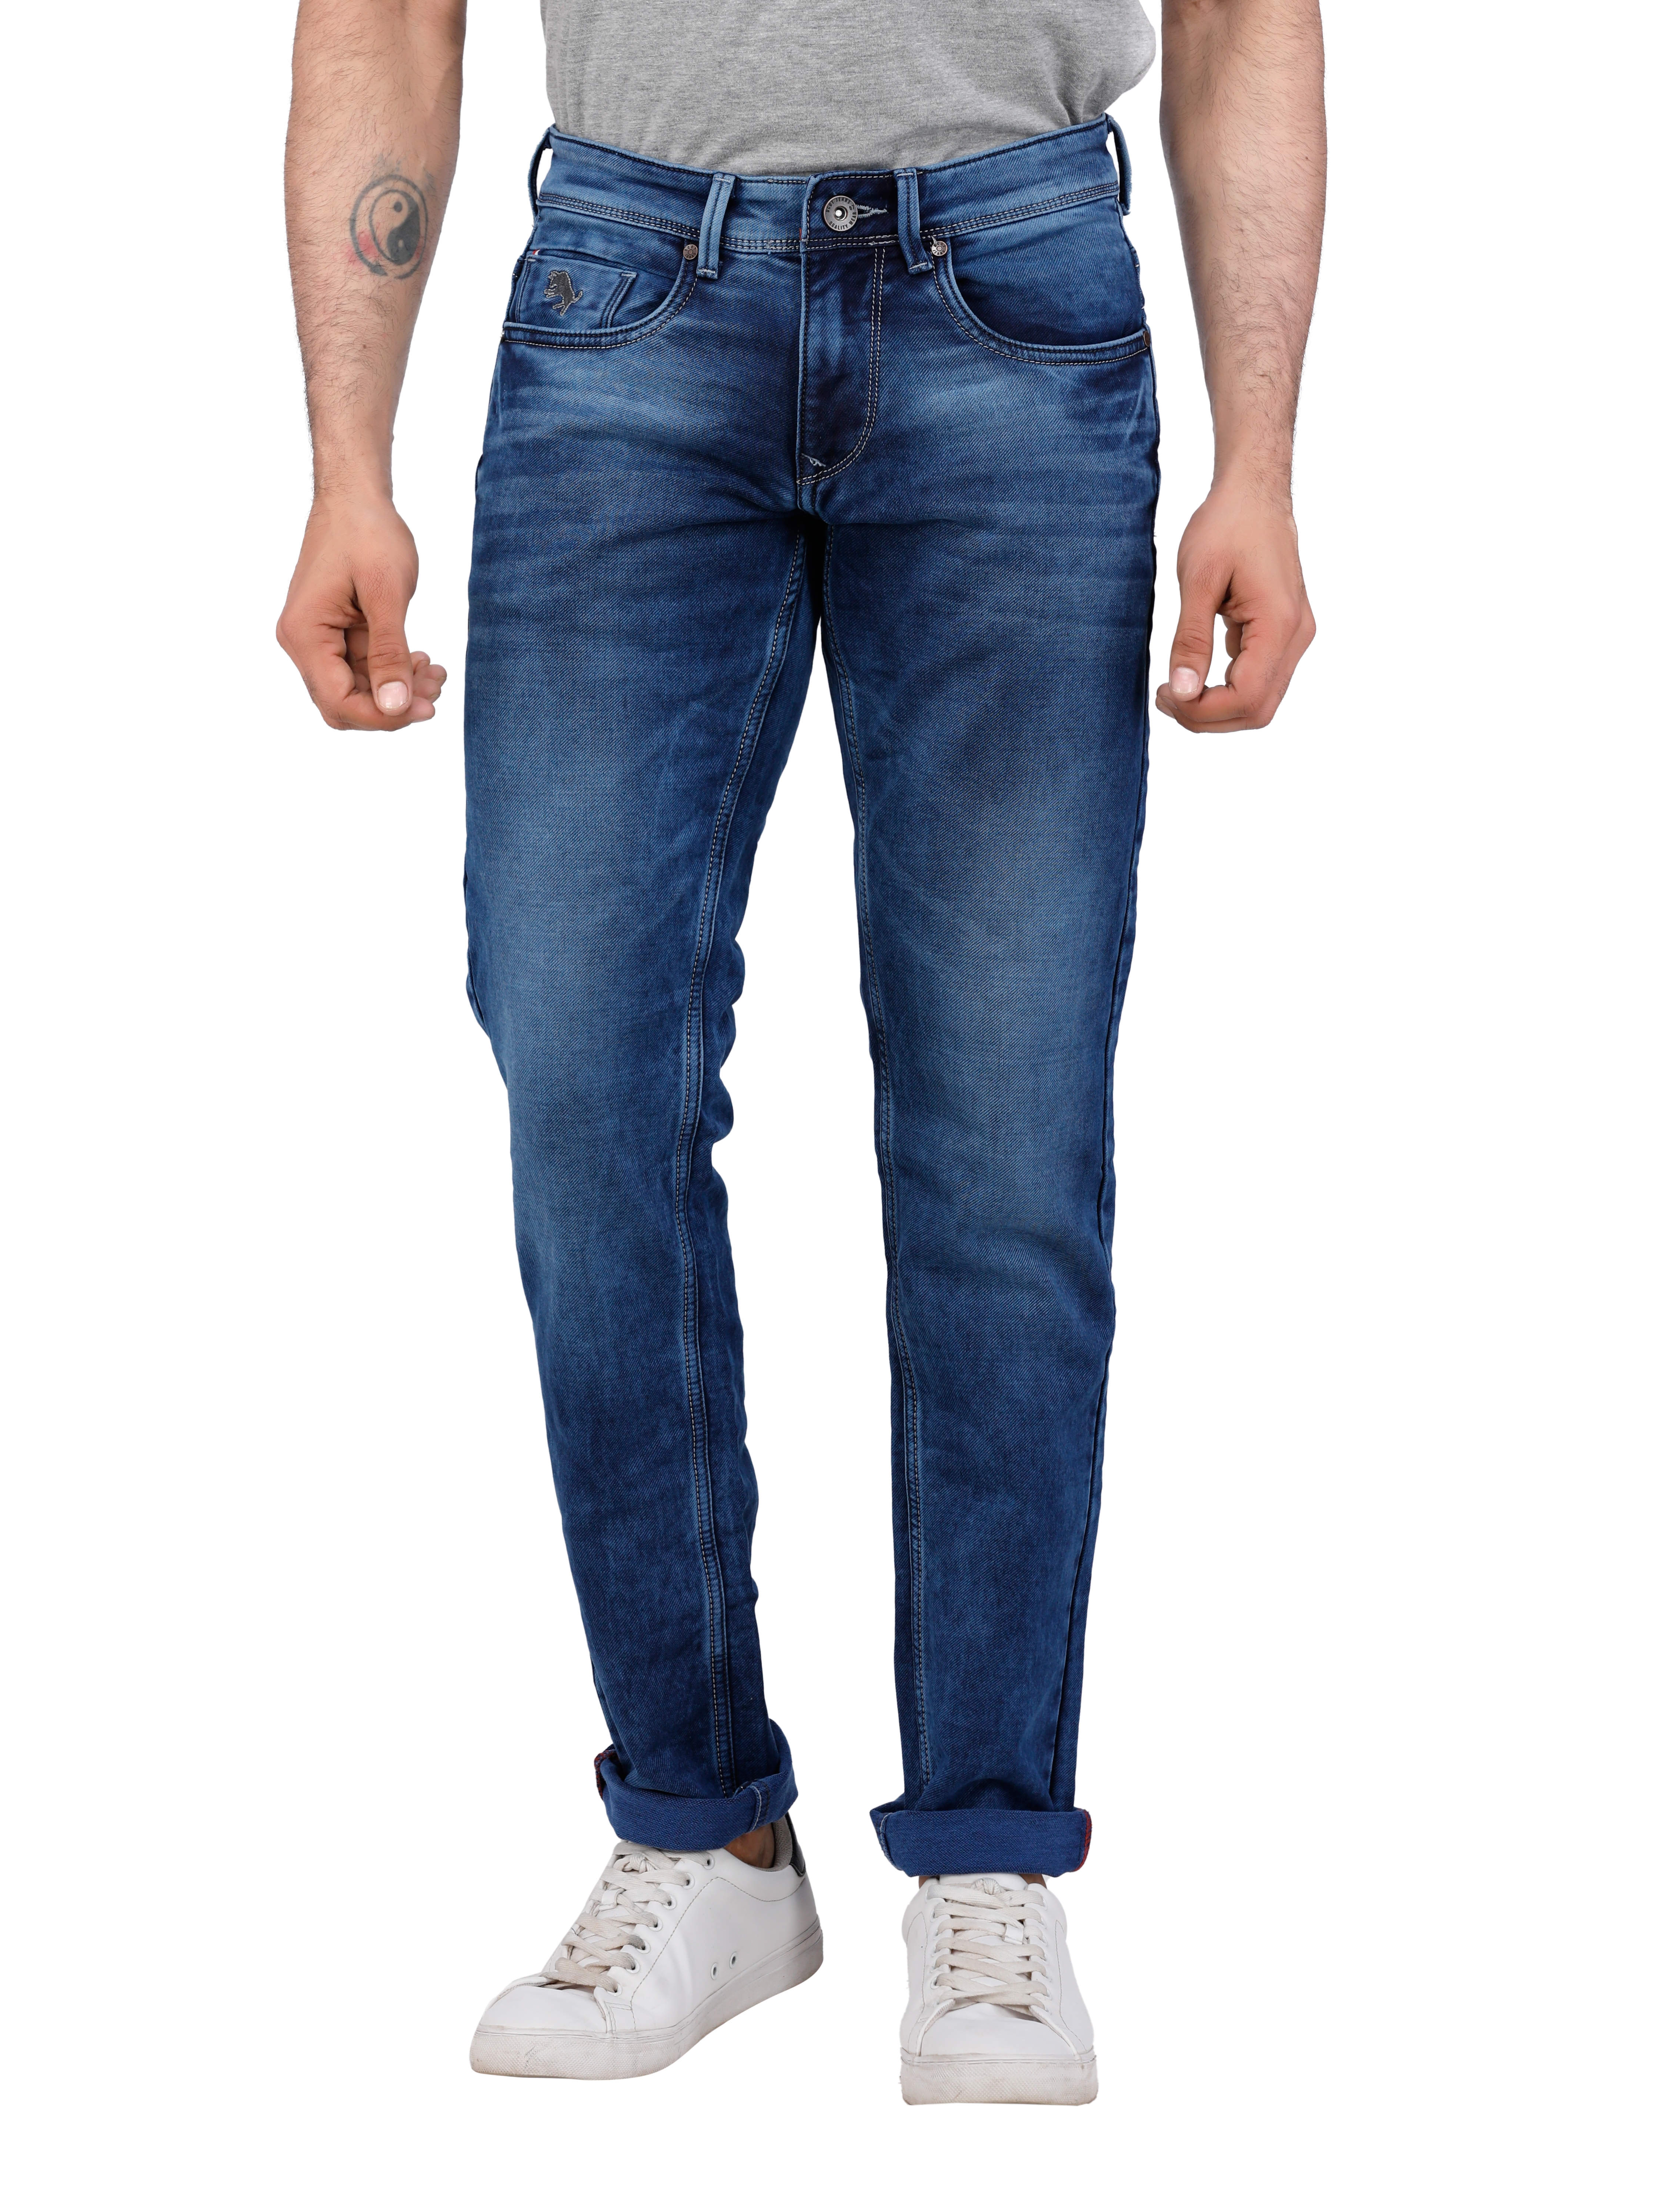 D'cot by Donear | D'cot by Donear Men Blue Cotton Skinny Solid Jeans